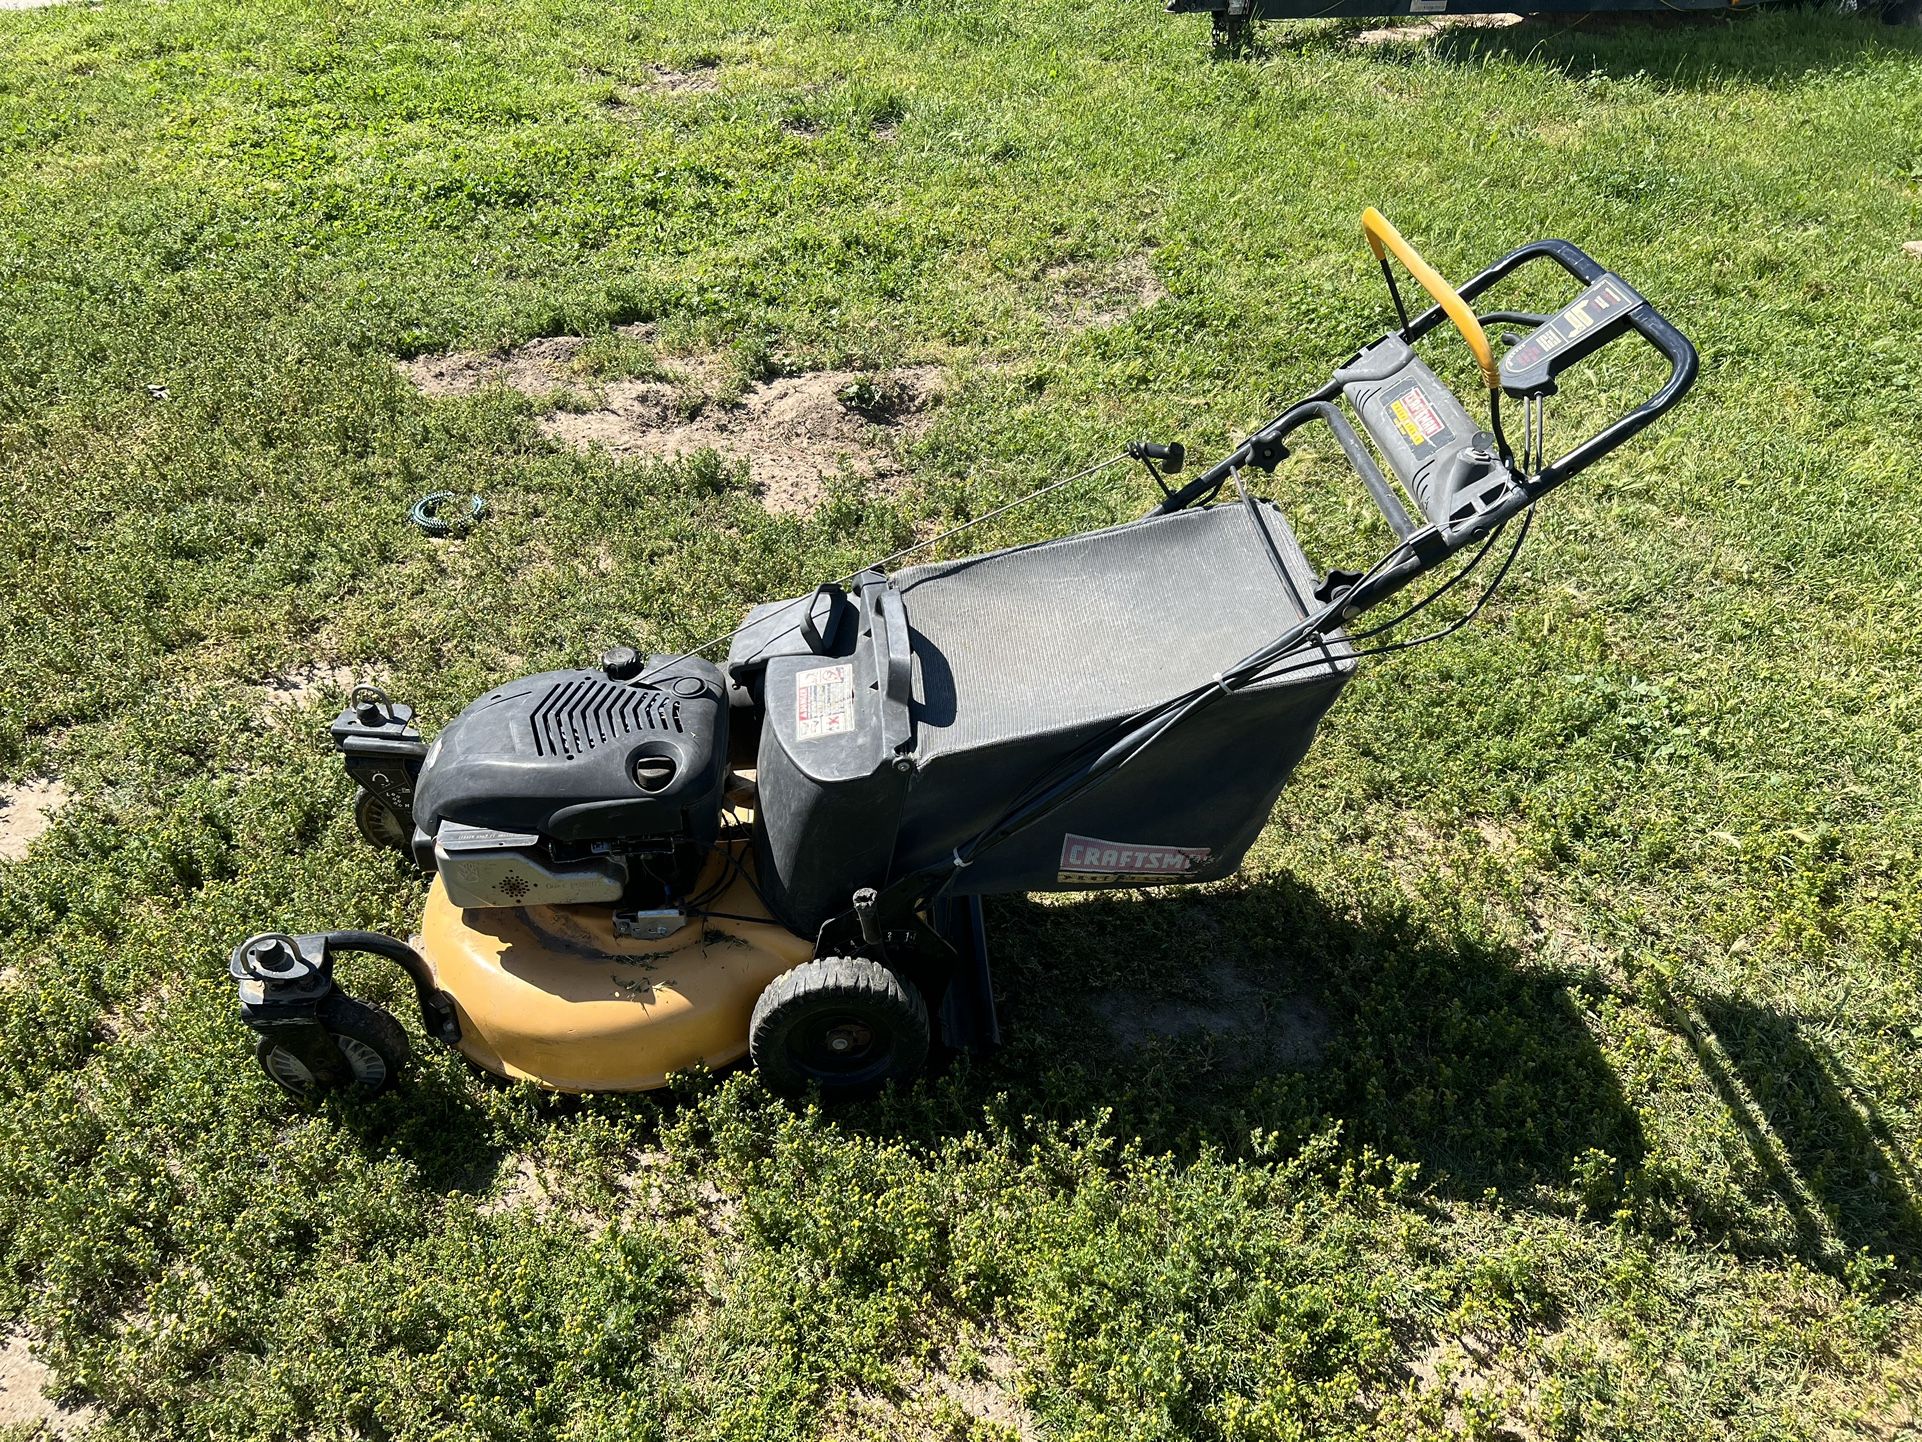 Craftsman Commercial Lawn Mower